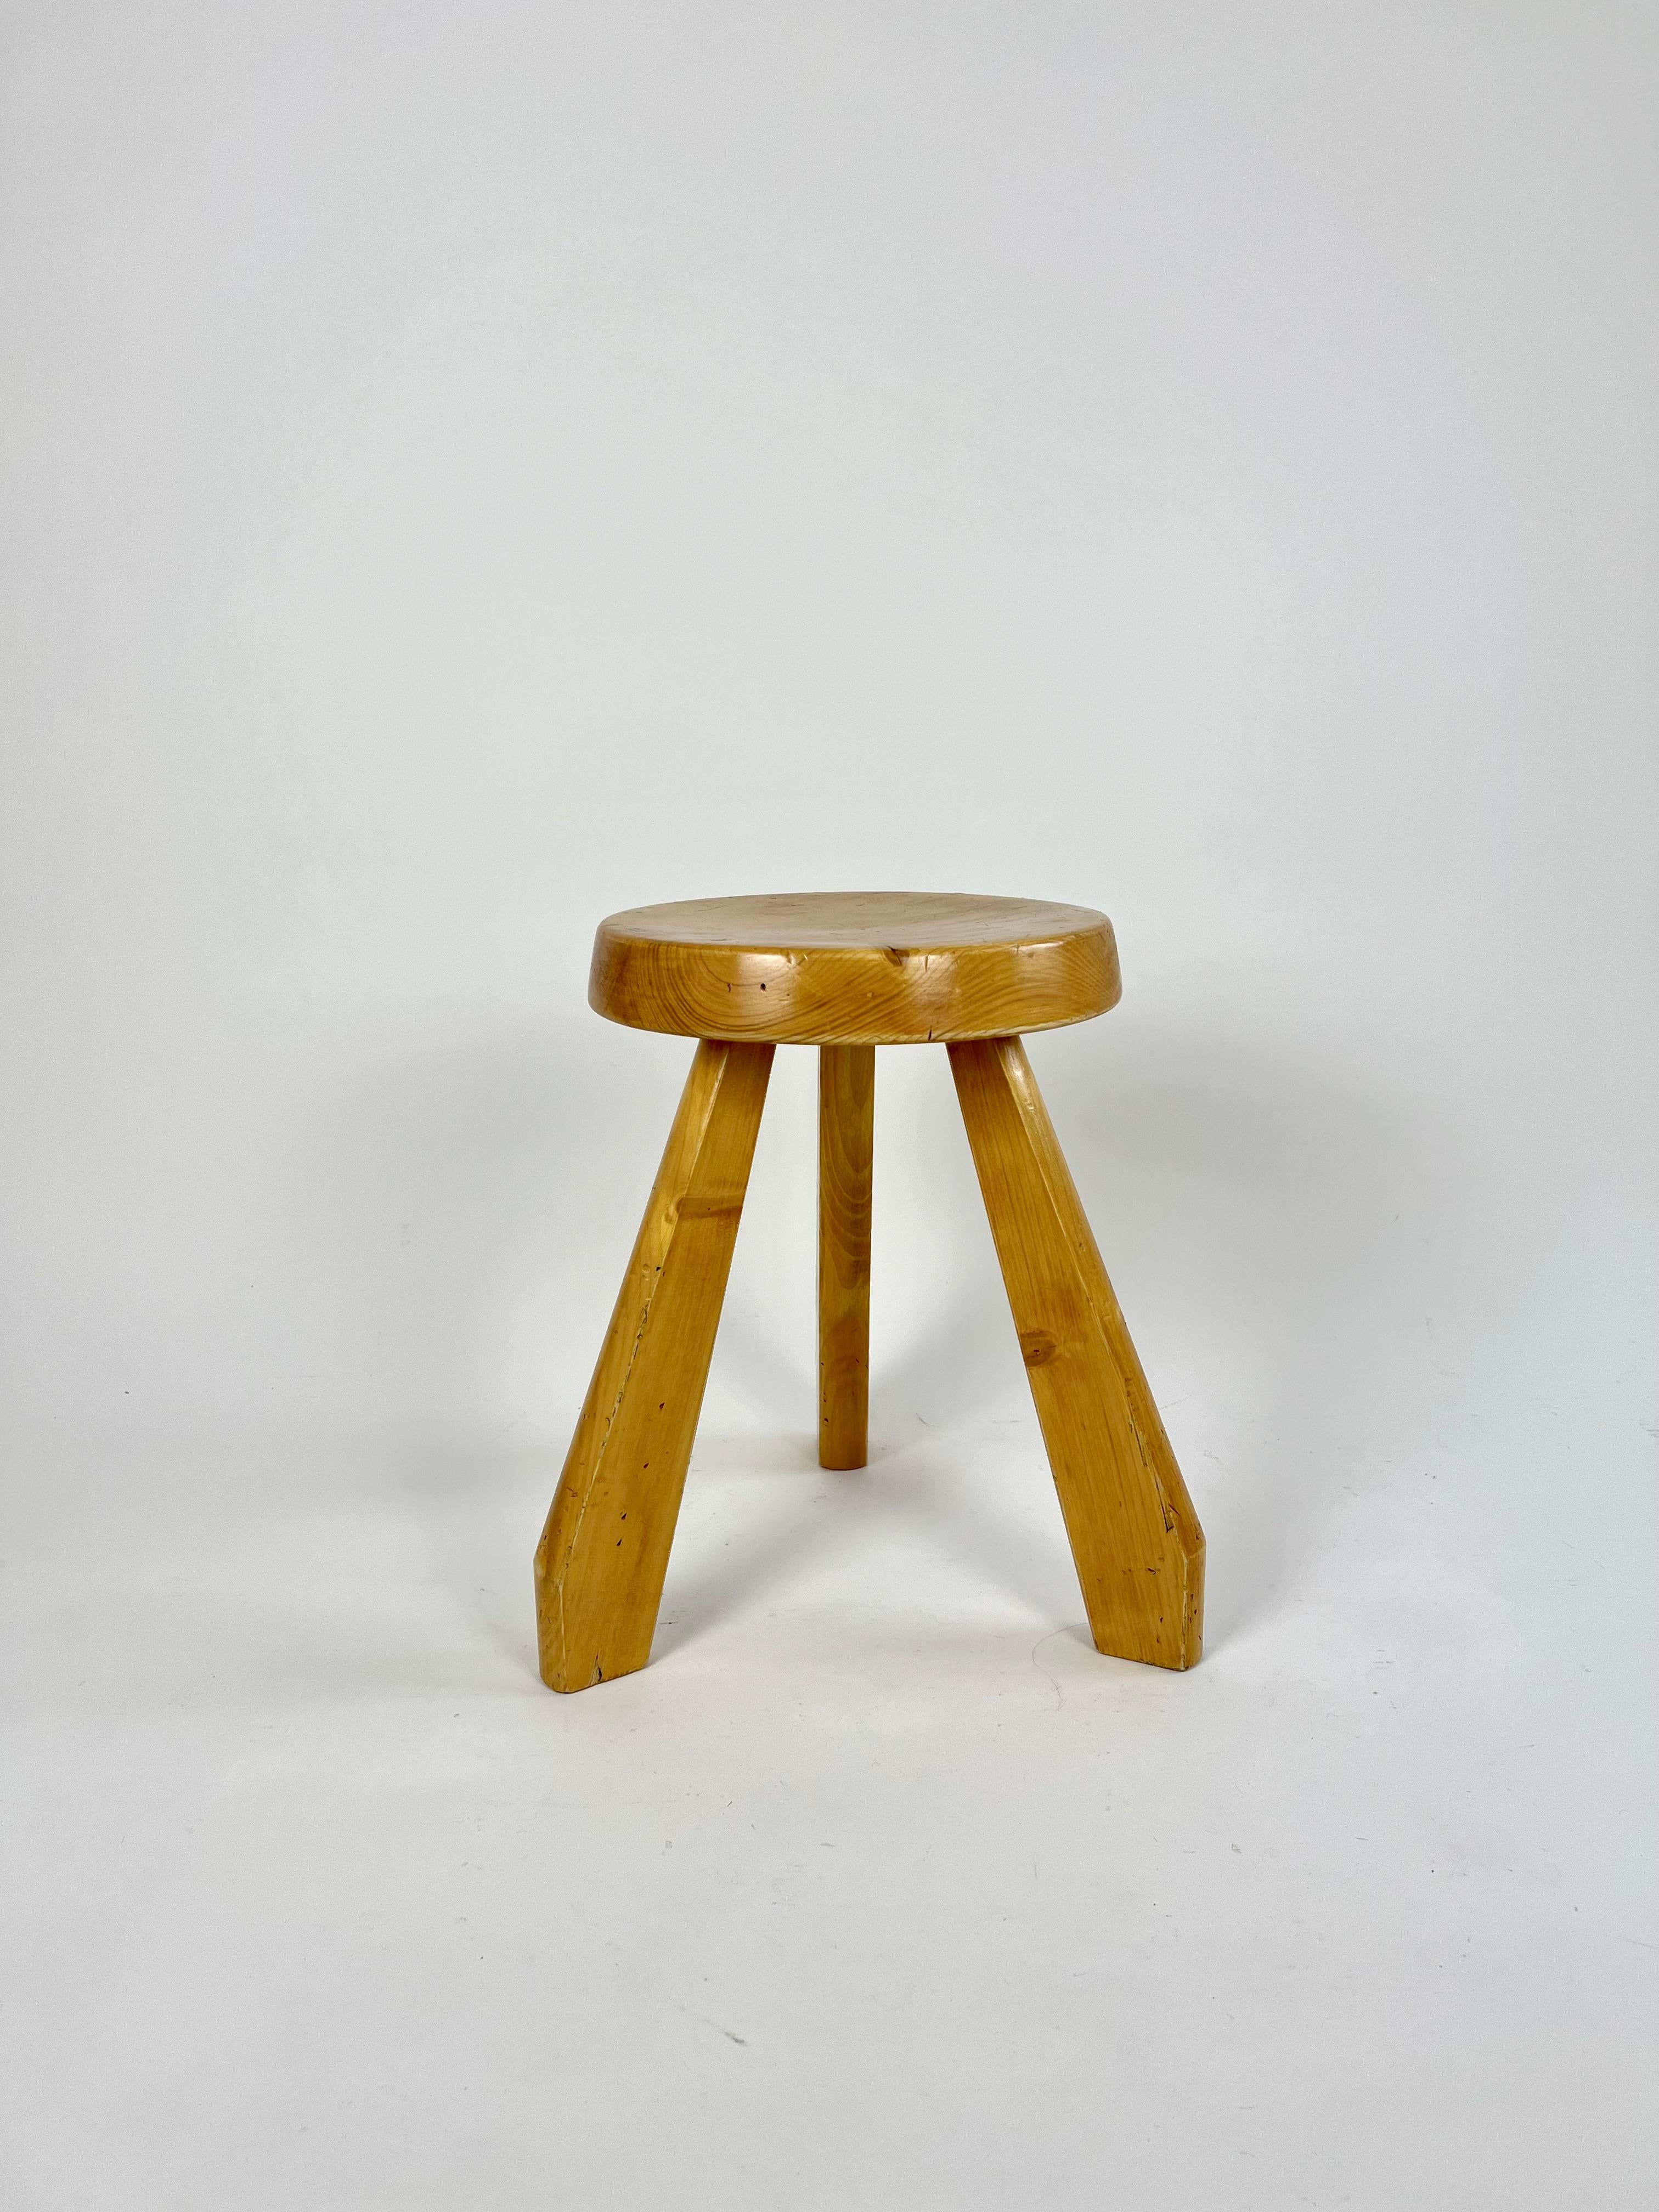 Pine stool by Charlotte Perriand, circa 1960 from Les Arcs, France.

Sourced from a chalet clearance in the Haute Savoie region of France.

Original condition, with signs of age and use, age related wear as pictured. Structurally solid with no